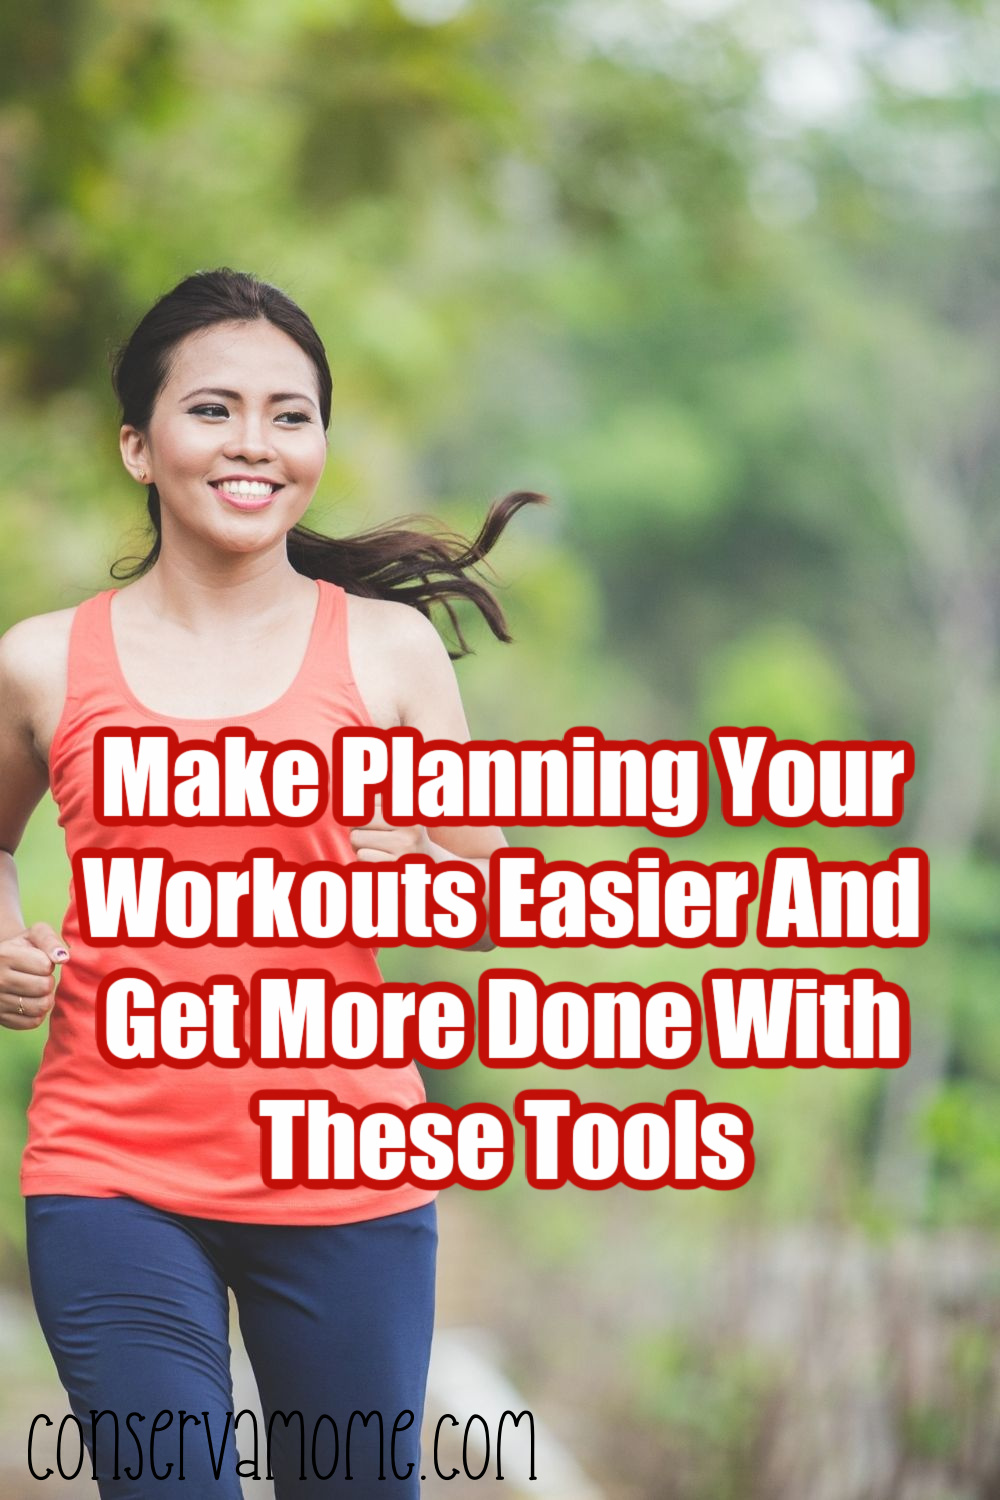 Make planning your workouts easier and get more done with these tools